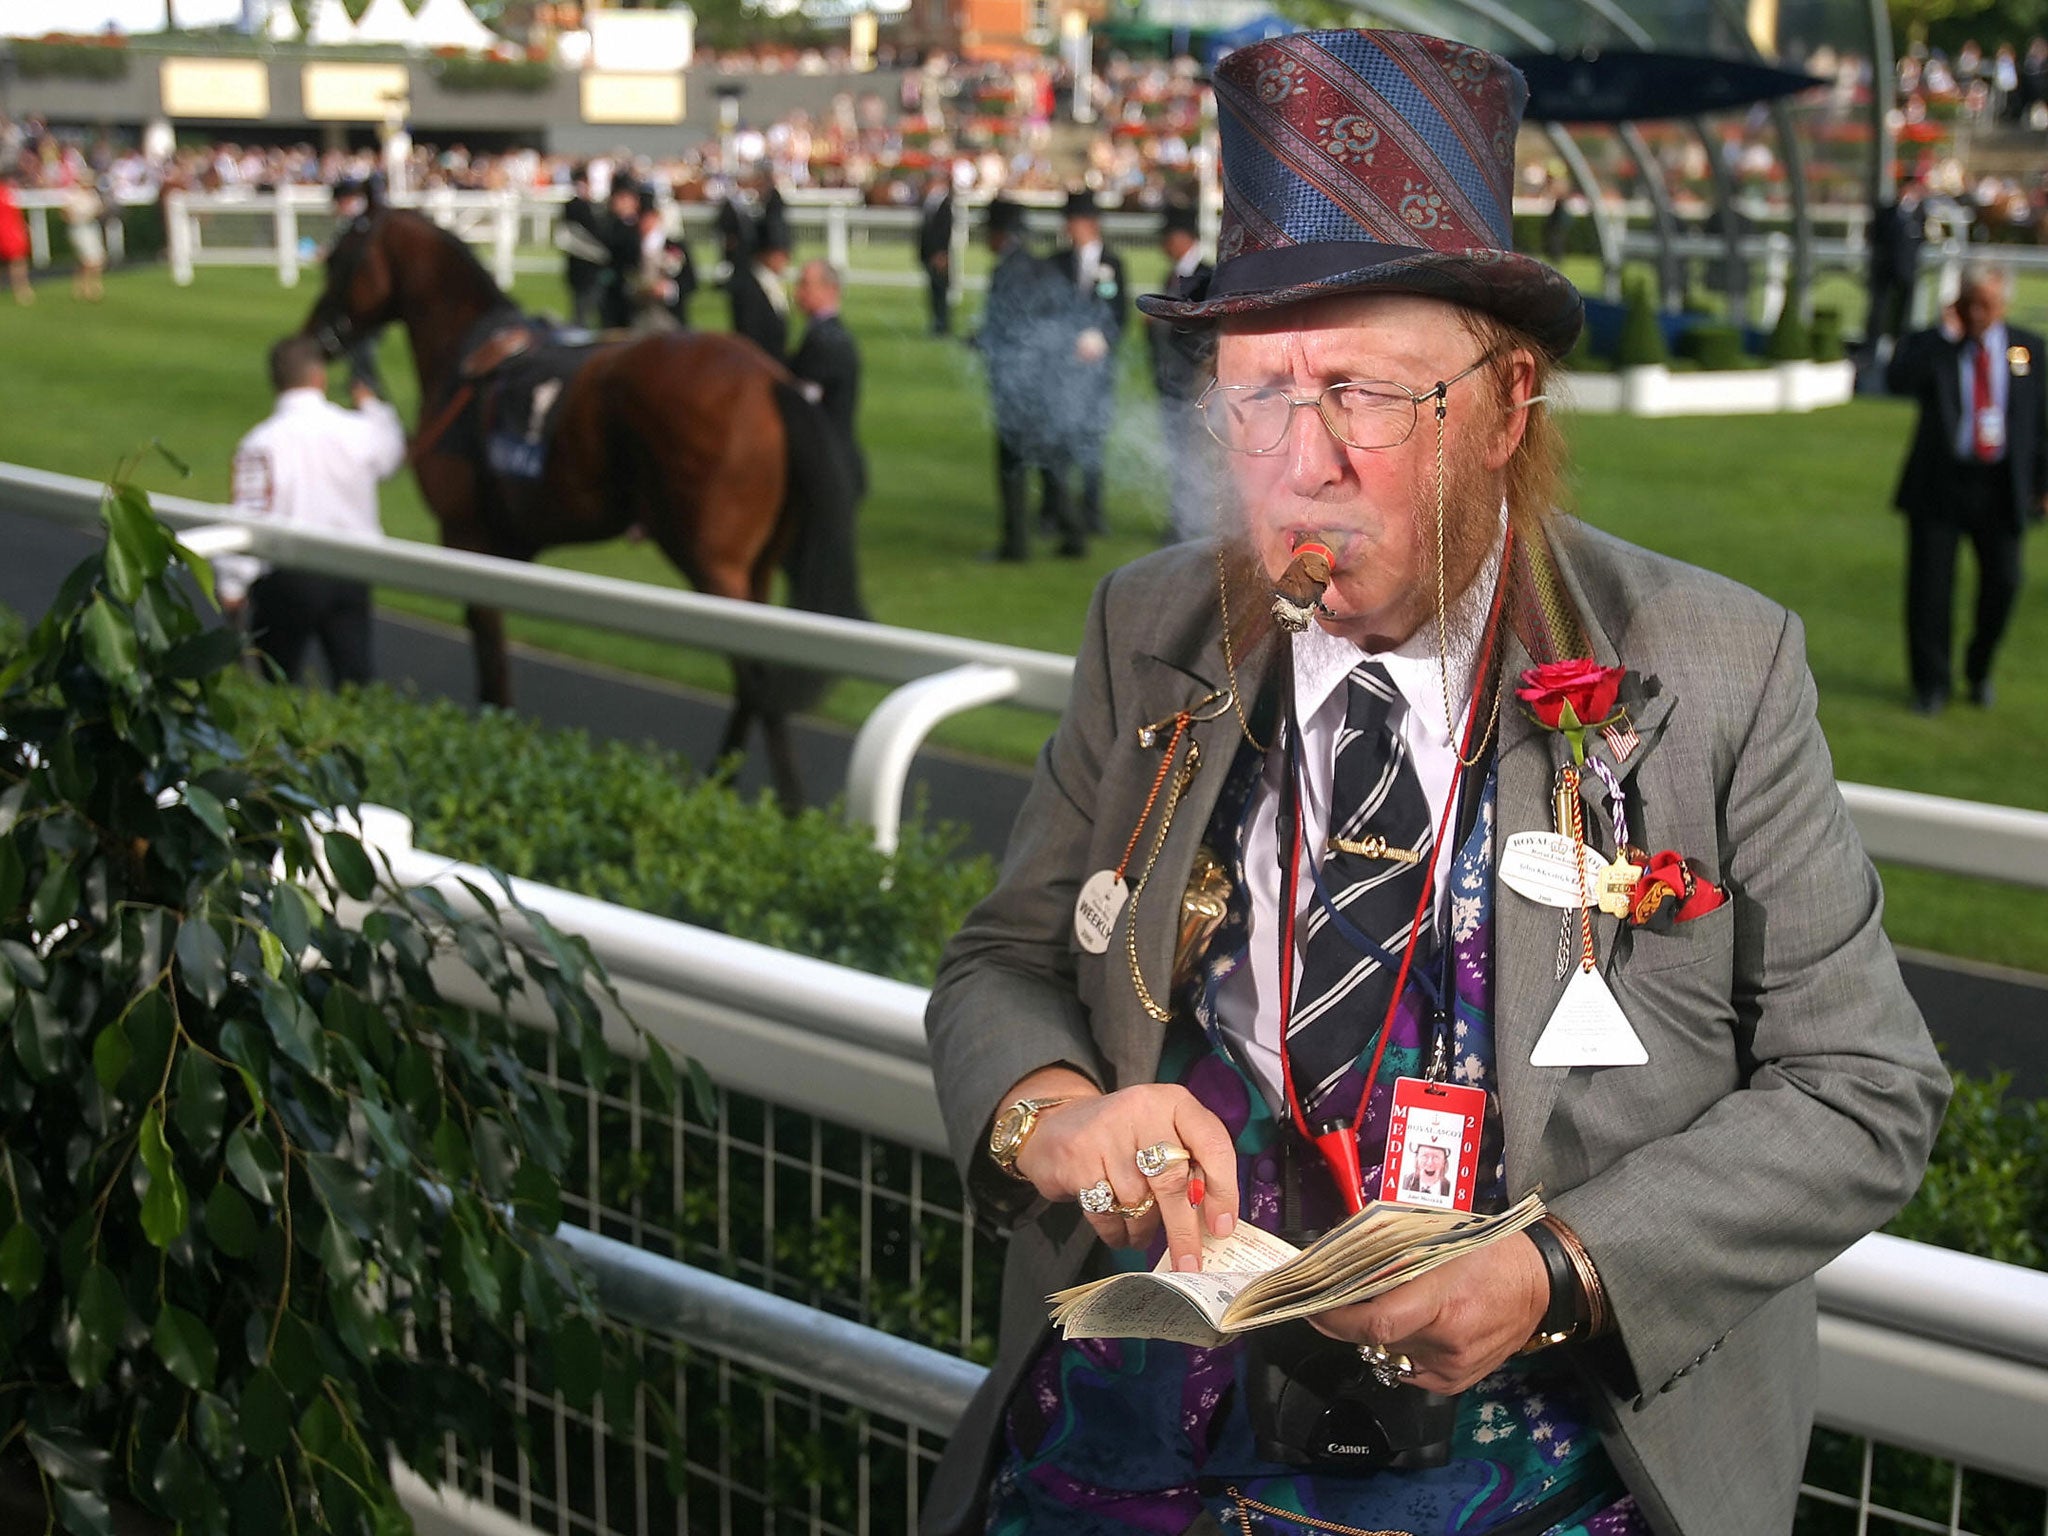 English television horse racing pundit john McCririck is pictured on the first day of Royal Ascot at Ascot racecourse in southern England, on June 17, 2008.